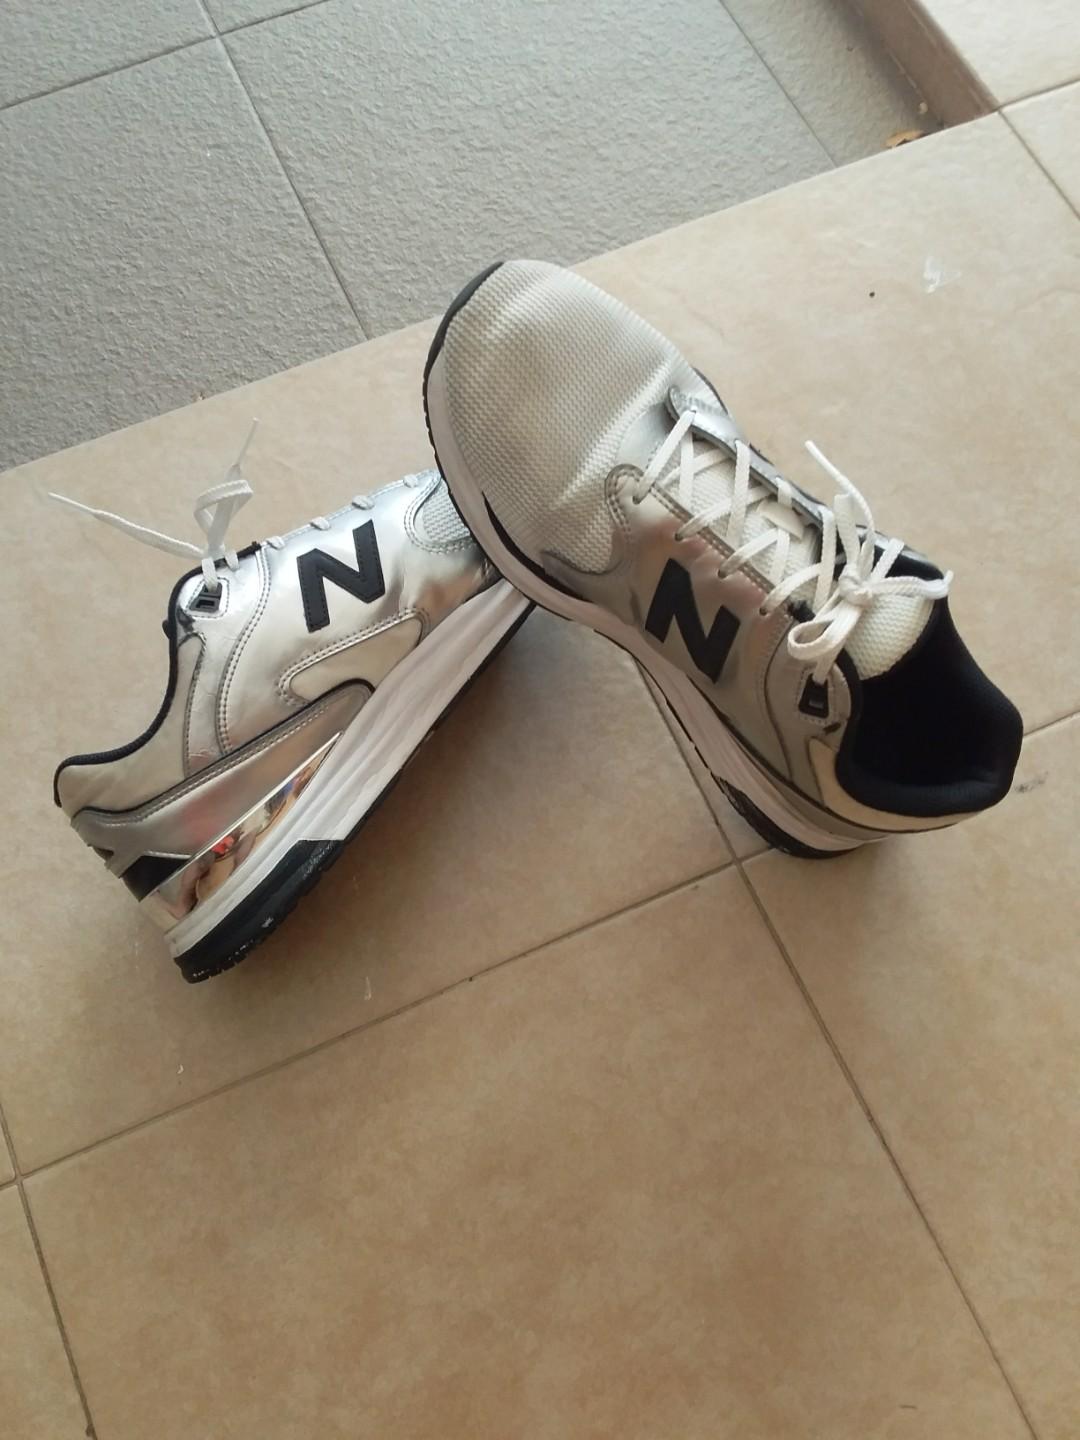 new balance shoes too small